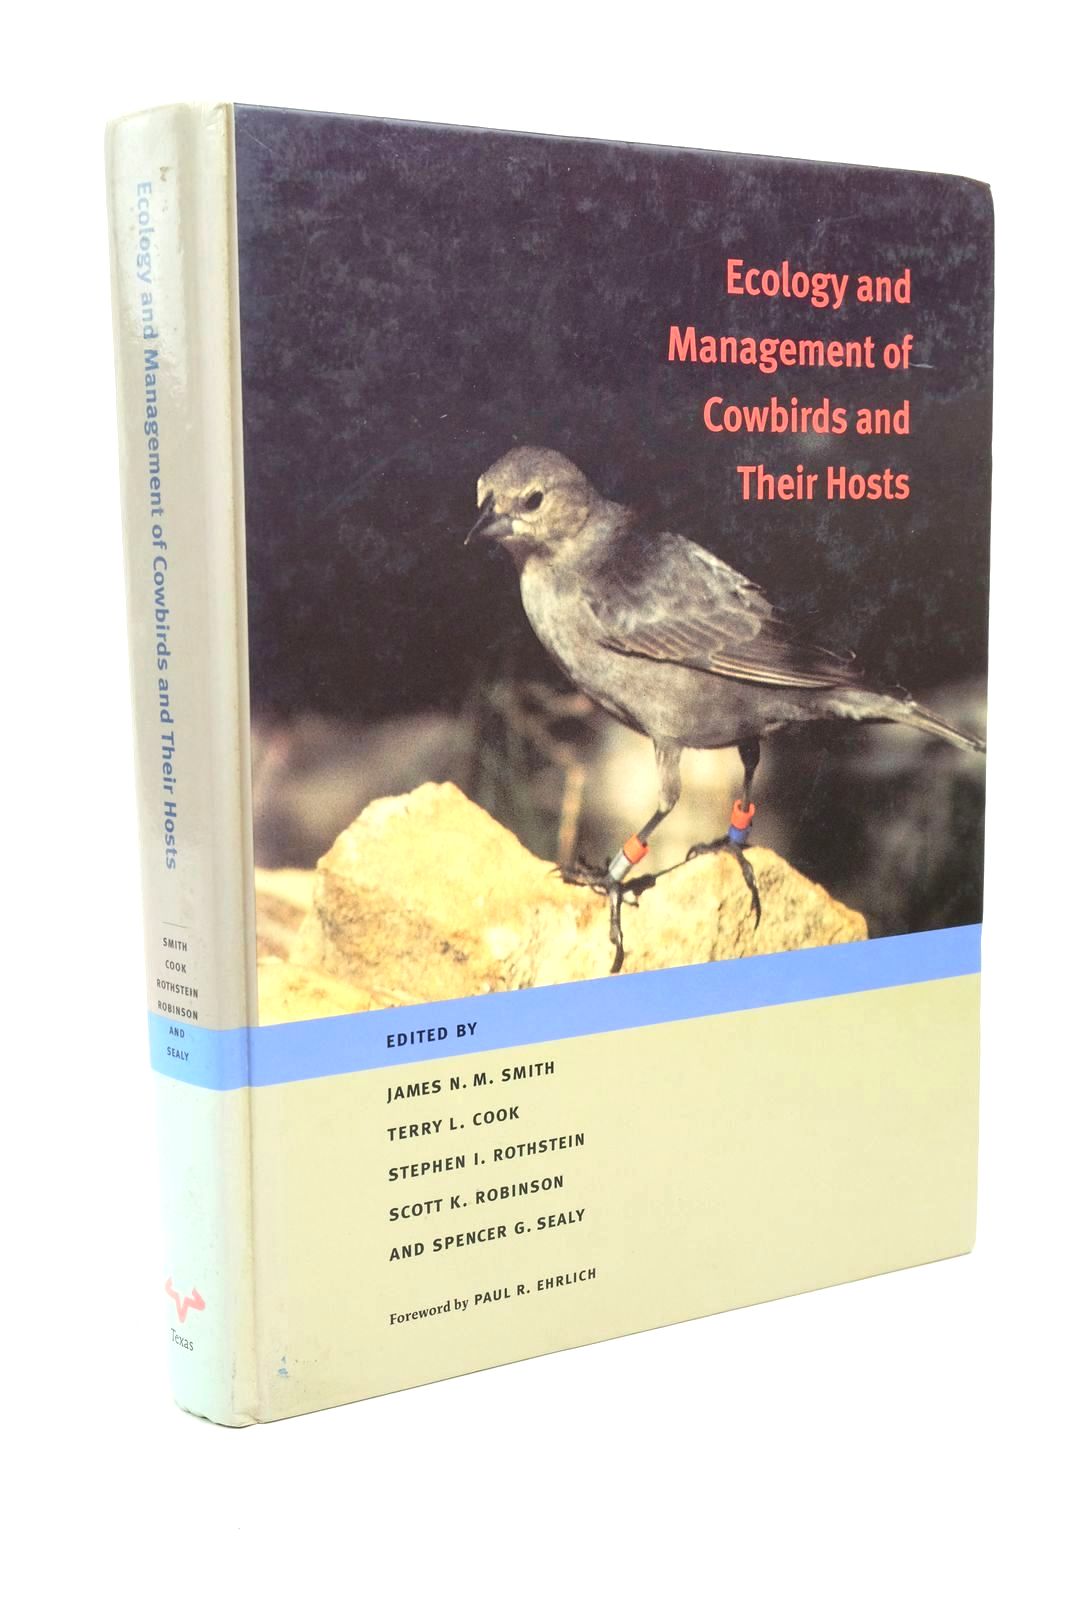 Photo of ECOLOGY AND MANAGEMENT OF COWBIRDS AND THEIR HOSTS written by Smith, James N.M. Cook, Terry L. Rothstein, Stephen I. Robinson, Scott K. Sealy, Spencer G. published by University of Texas Press (STOCK CODE: 1323098)  for sale by Stella & Rose's Books